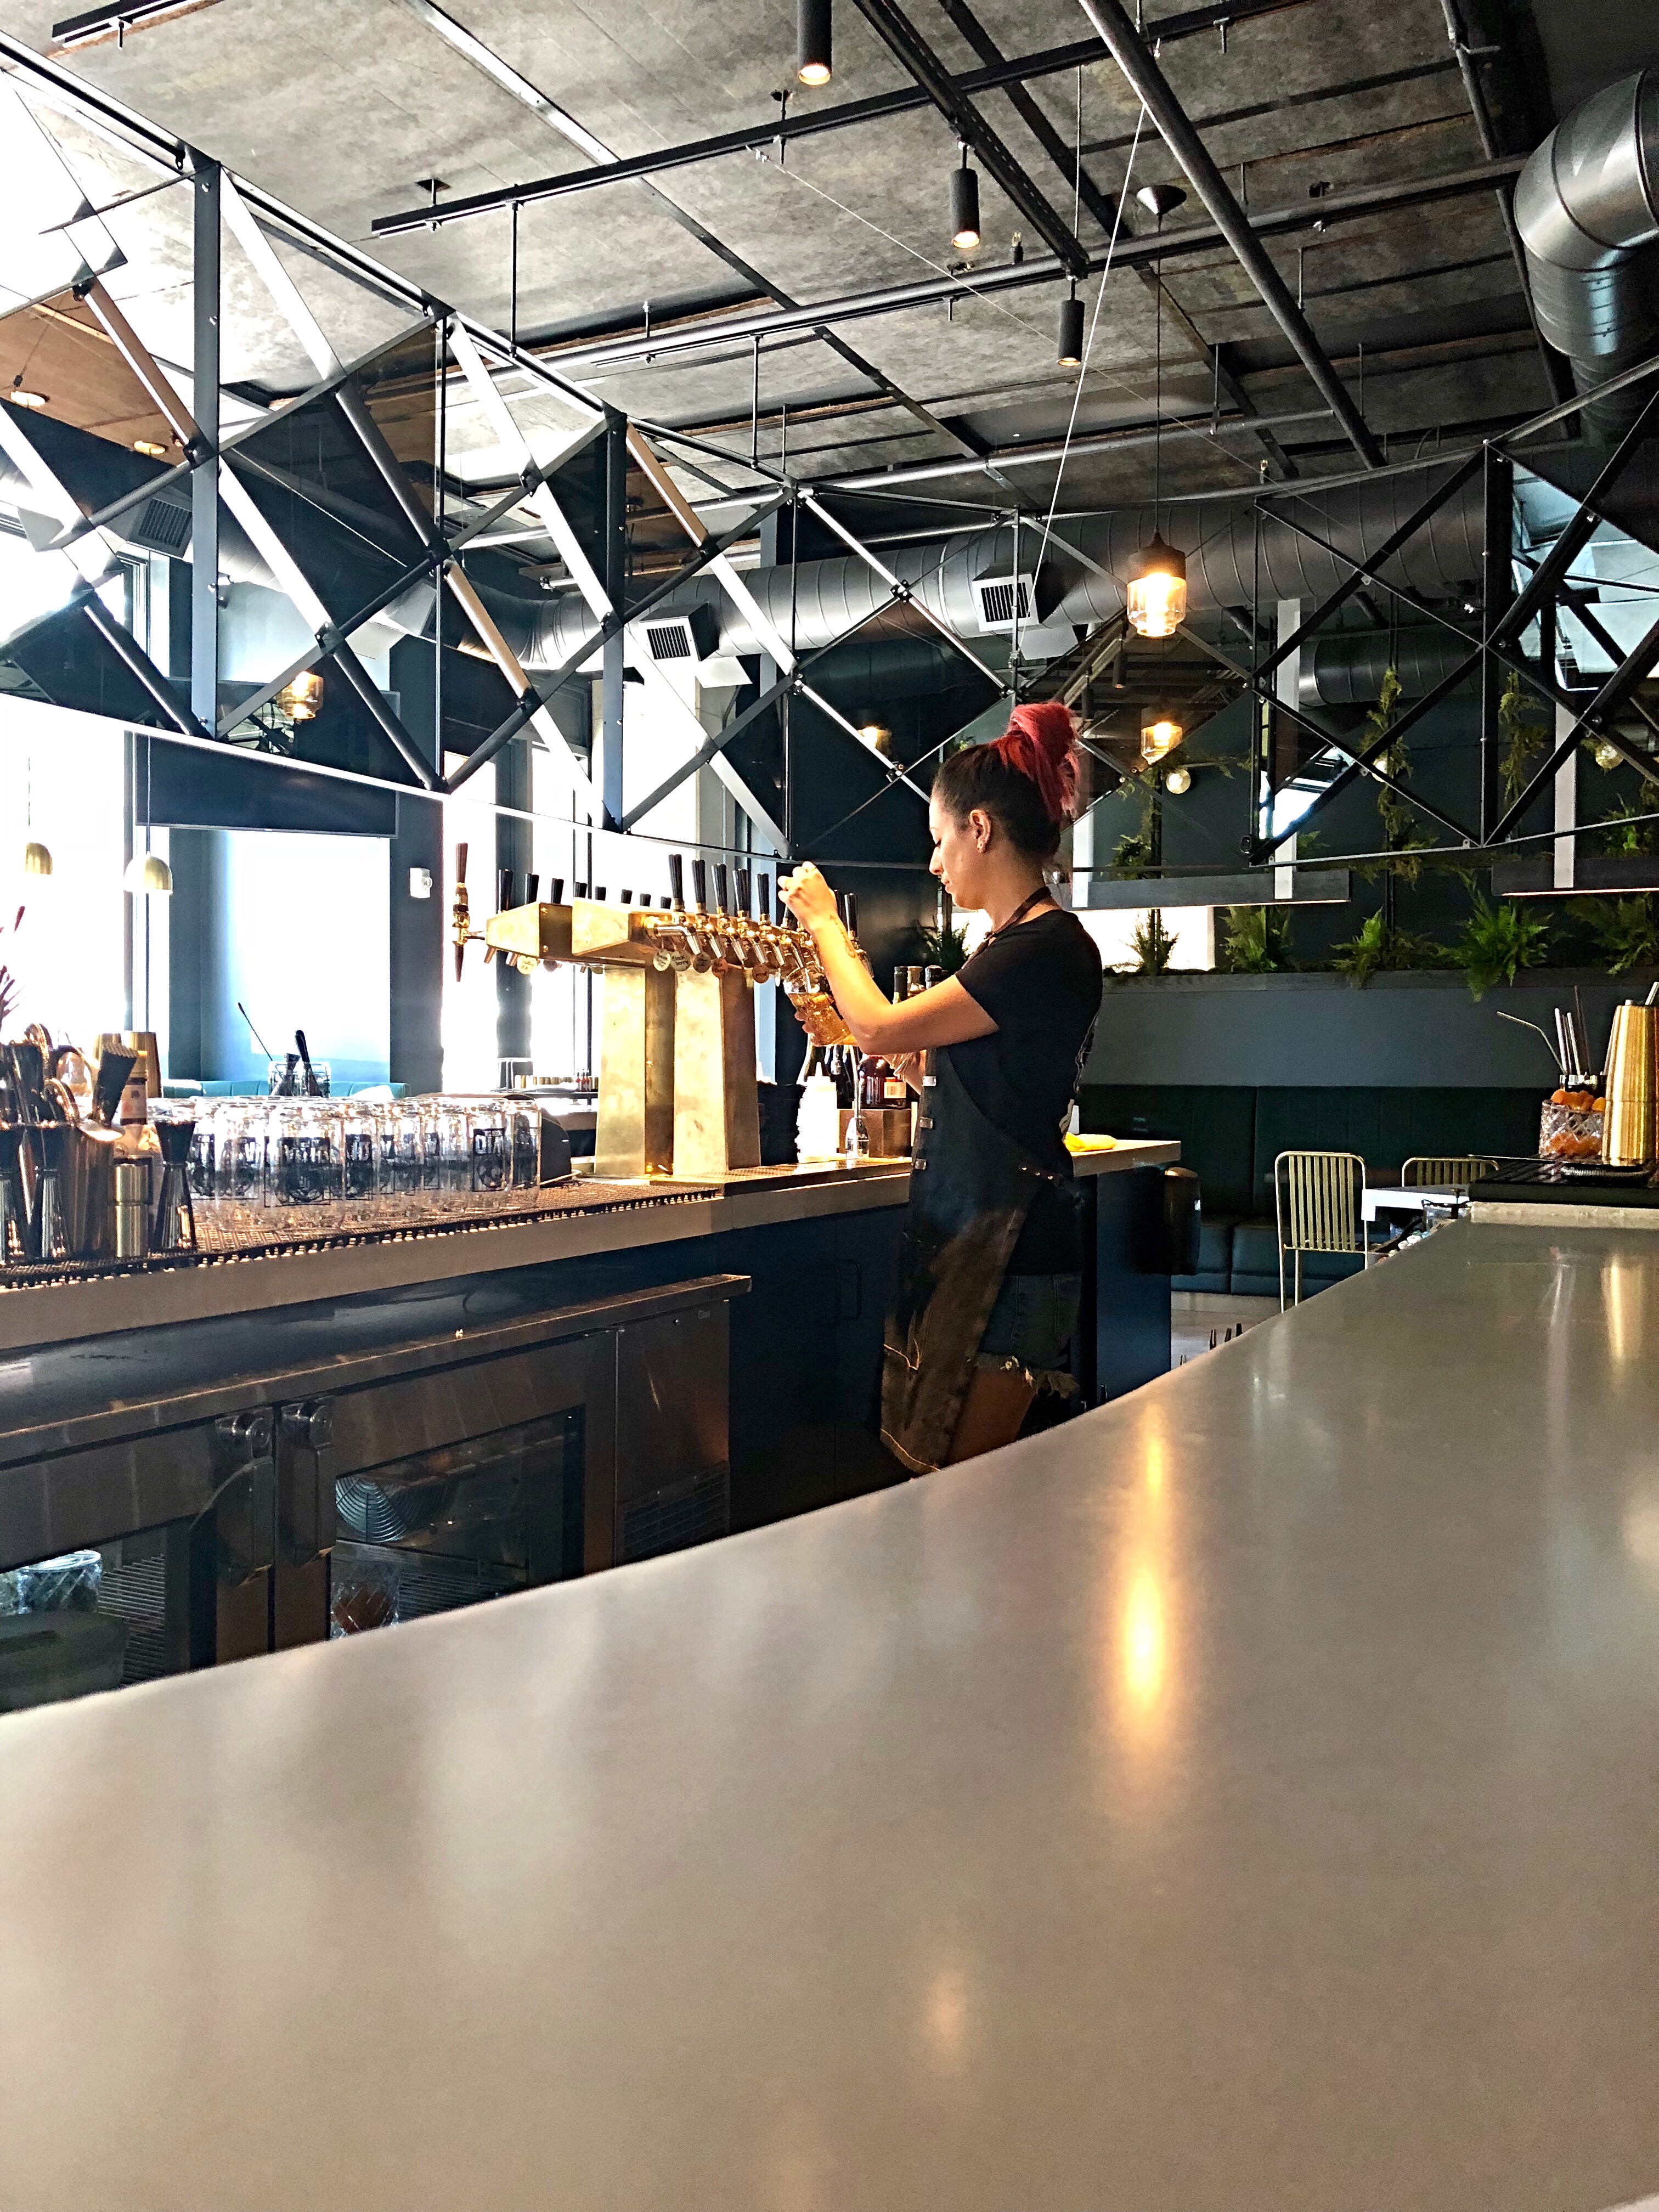 The retro yet modern feel of the bar at the new Avid Cider Co. Cider House in Portland's Pearl District.